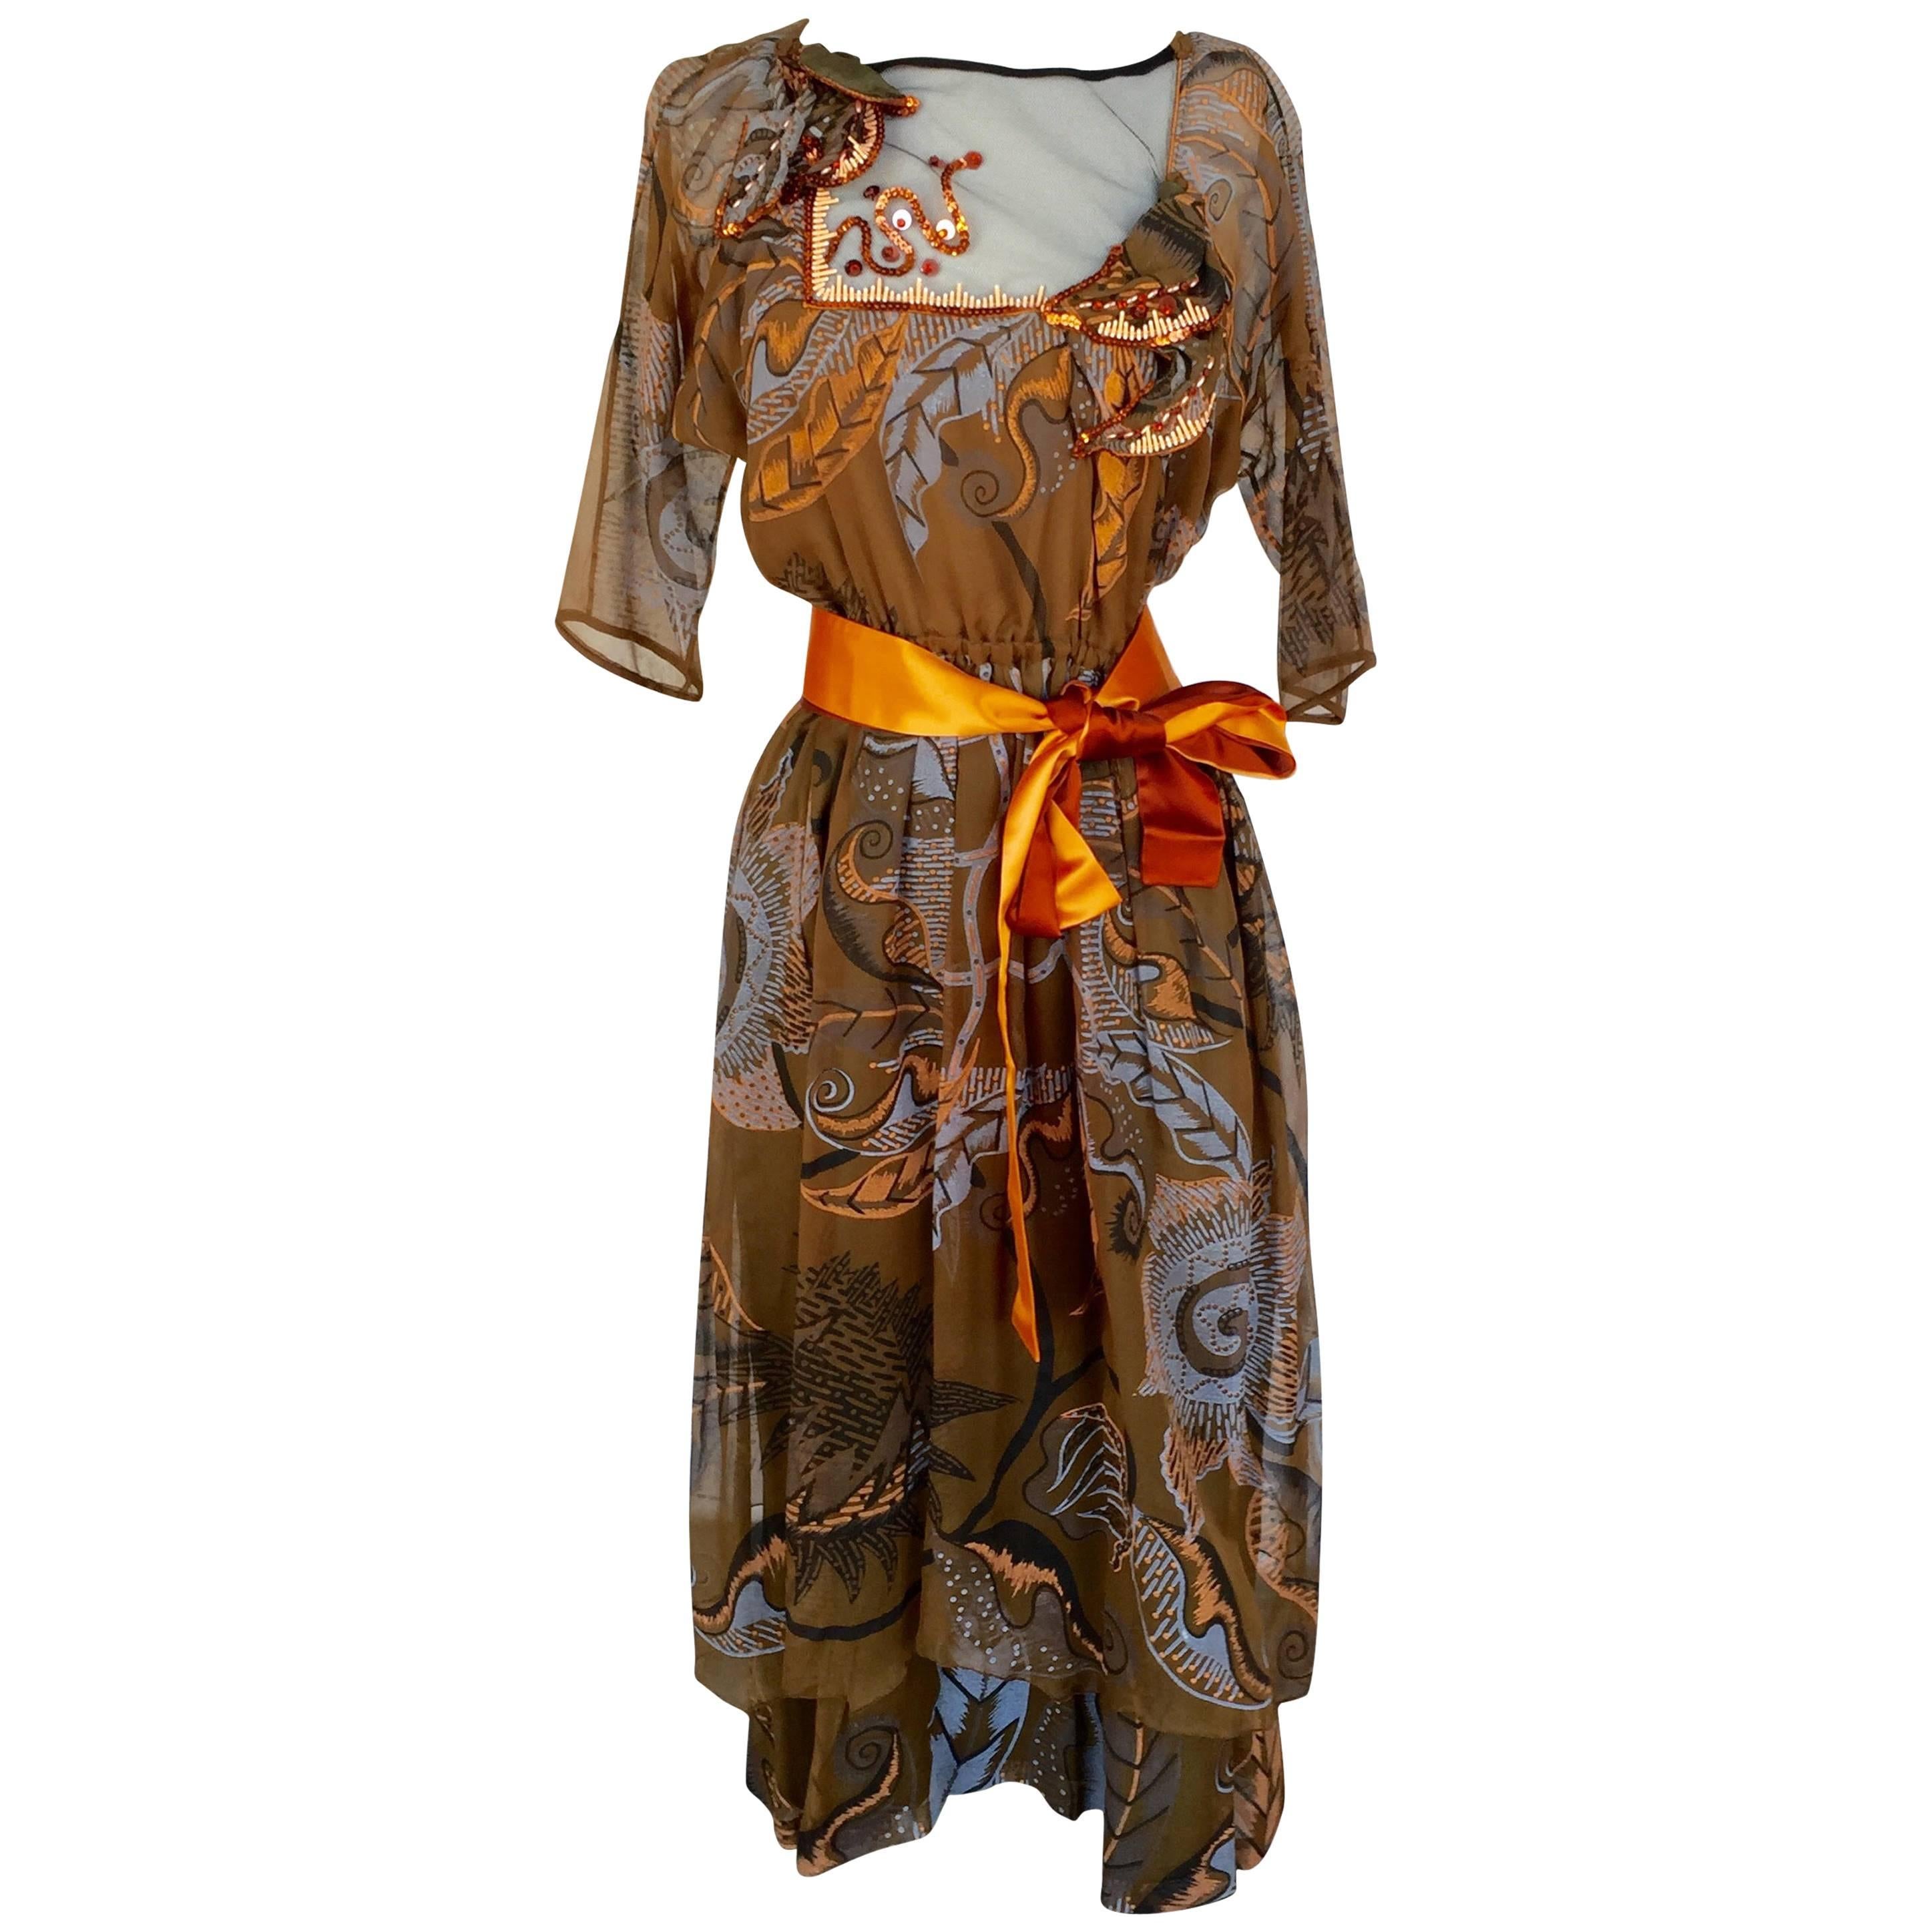 1970s Zandra Rhodes Hand-Painted Silk Chiffon Dress Embellished Beads Sequins For Sale